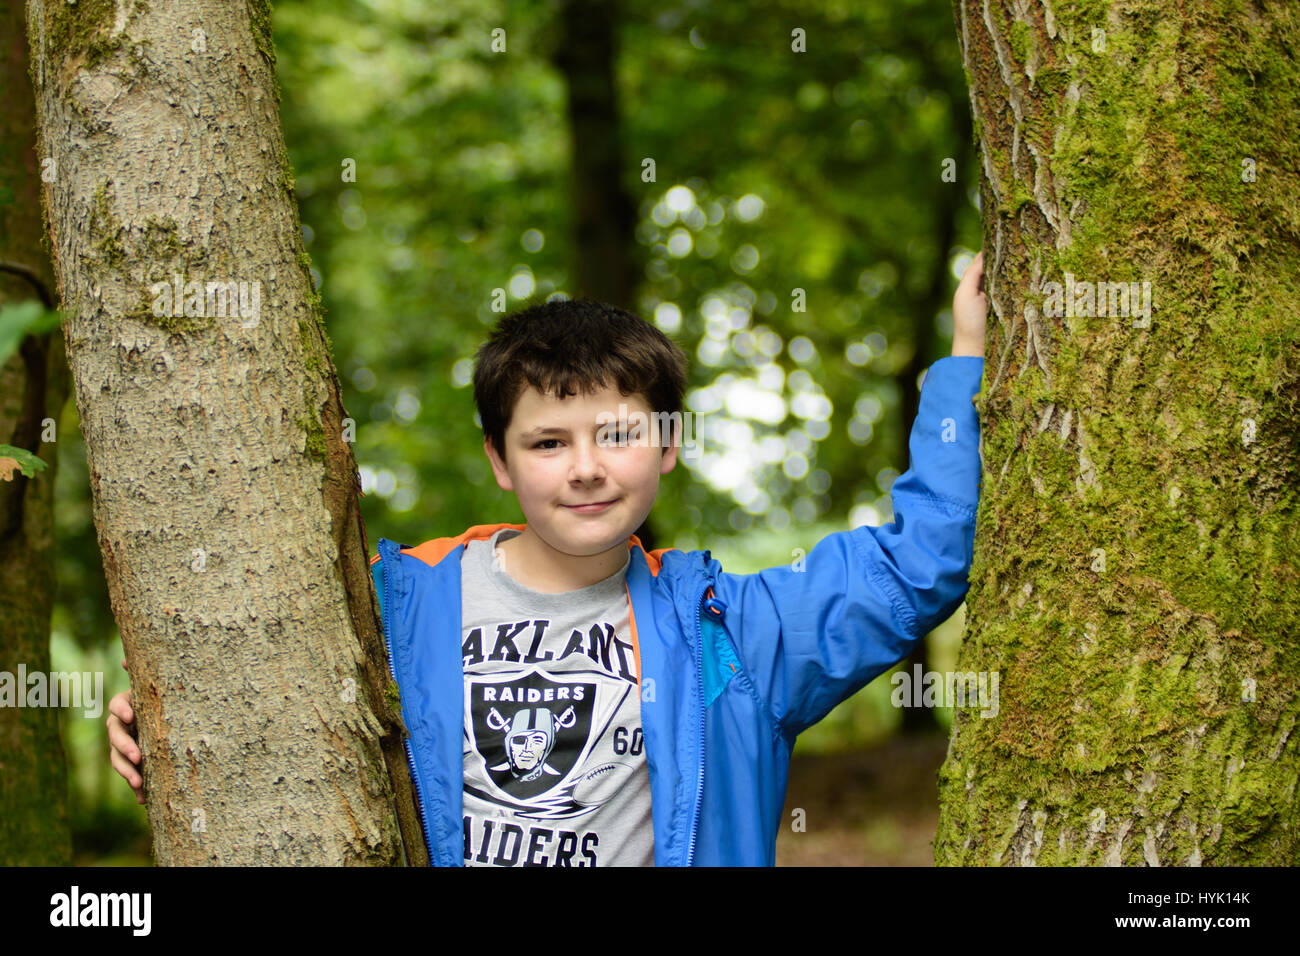 young boy enjoying a day out Stock Photo